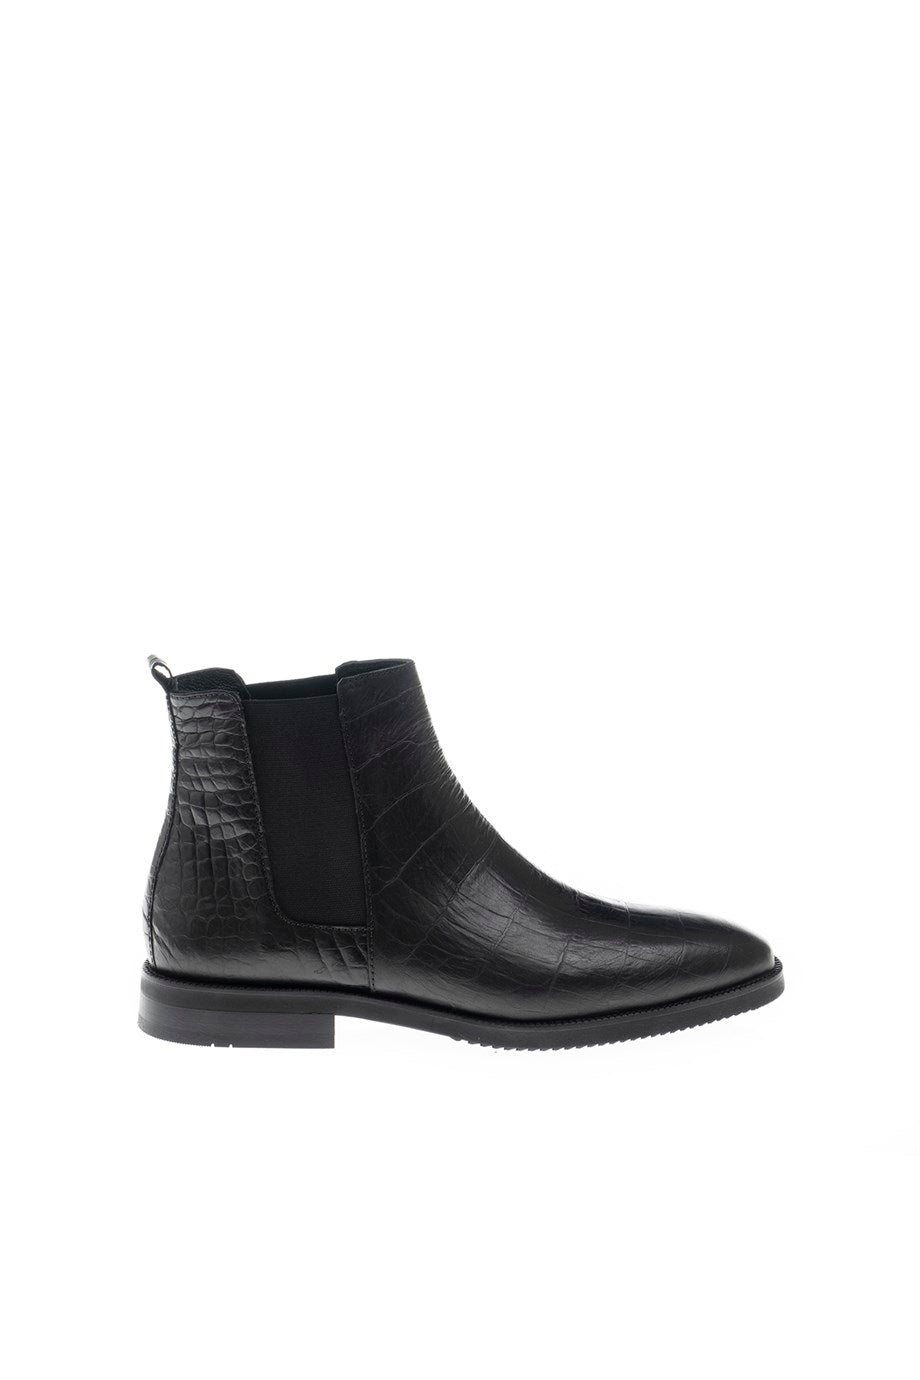 Eva Sole Crocodile Patterned Boots - MENSTYLEWITH